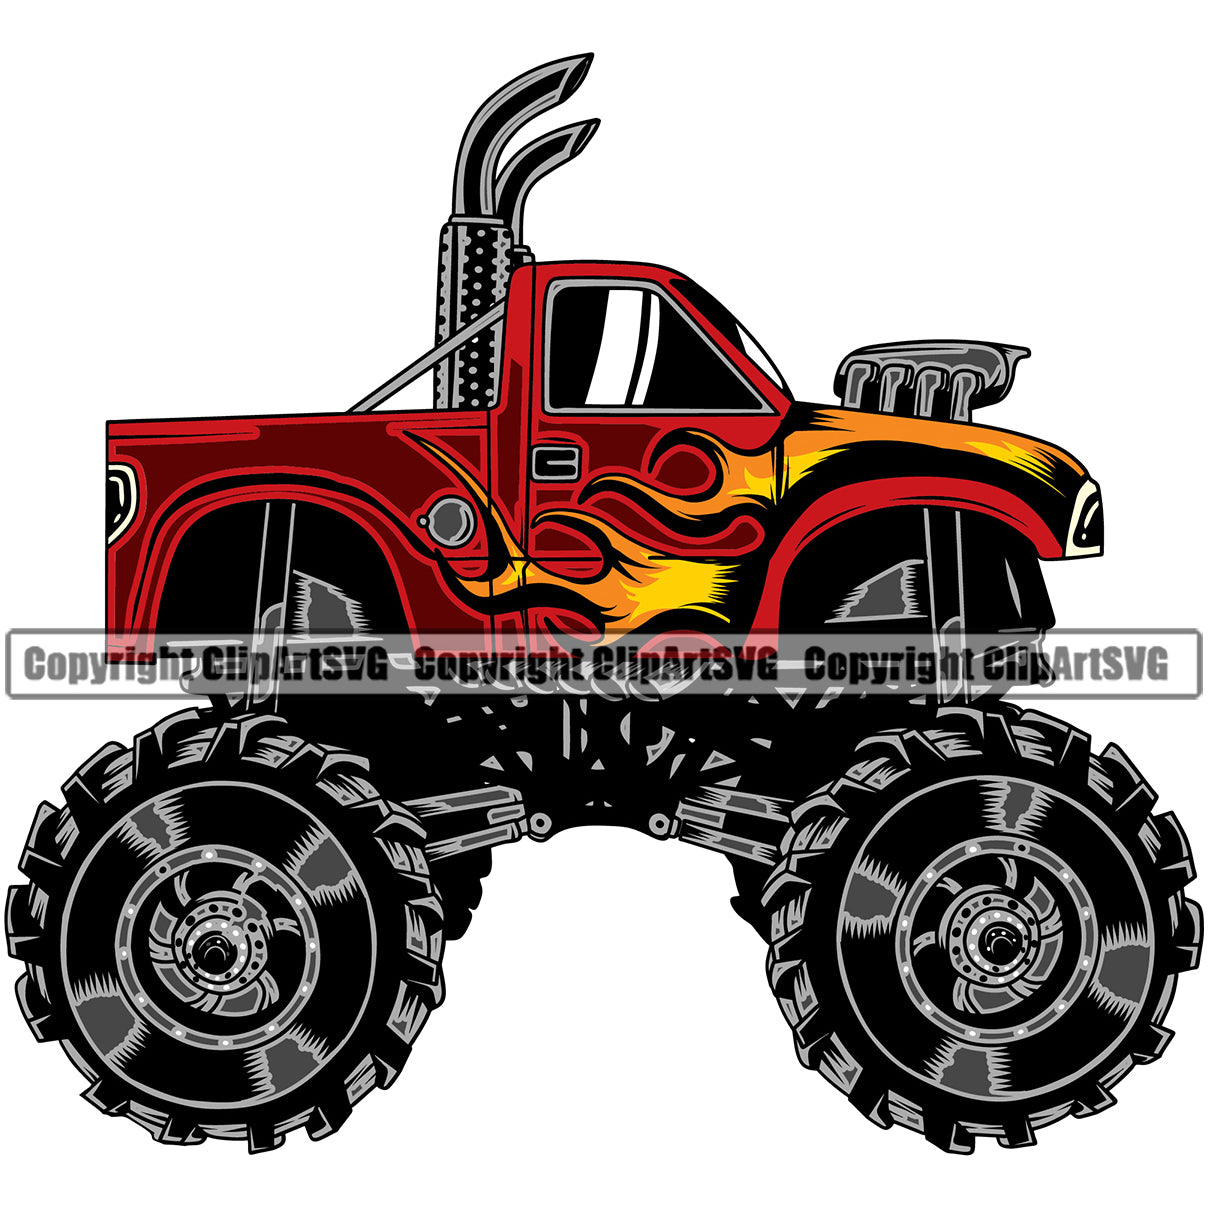 Monster truck. Bright colorful cartoon auto with big wheels. Heavy car with  large tires and black tinted windows. Isolated rally 4x4 computer or mobile  game Stock Vector by ©Designer_things 558772892